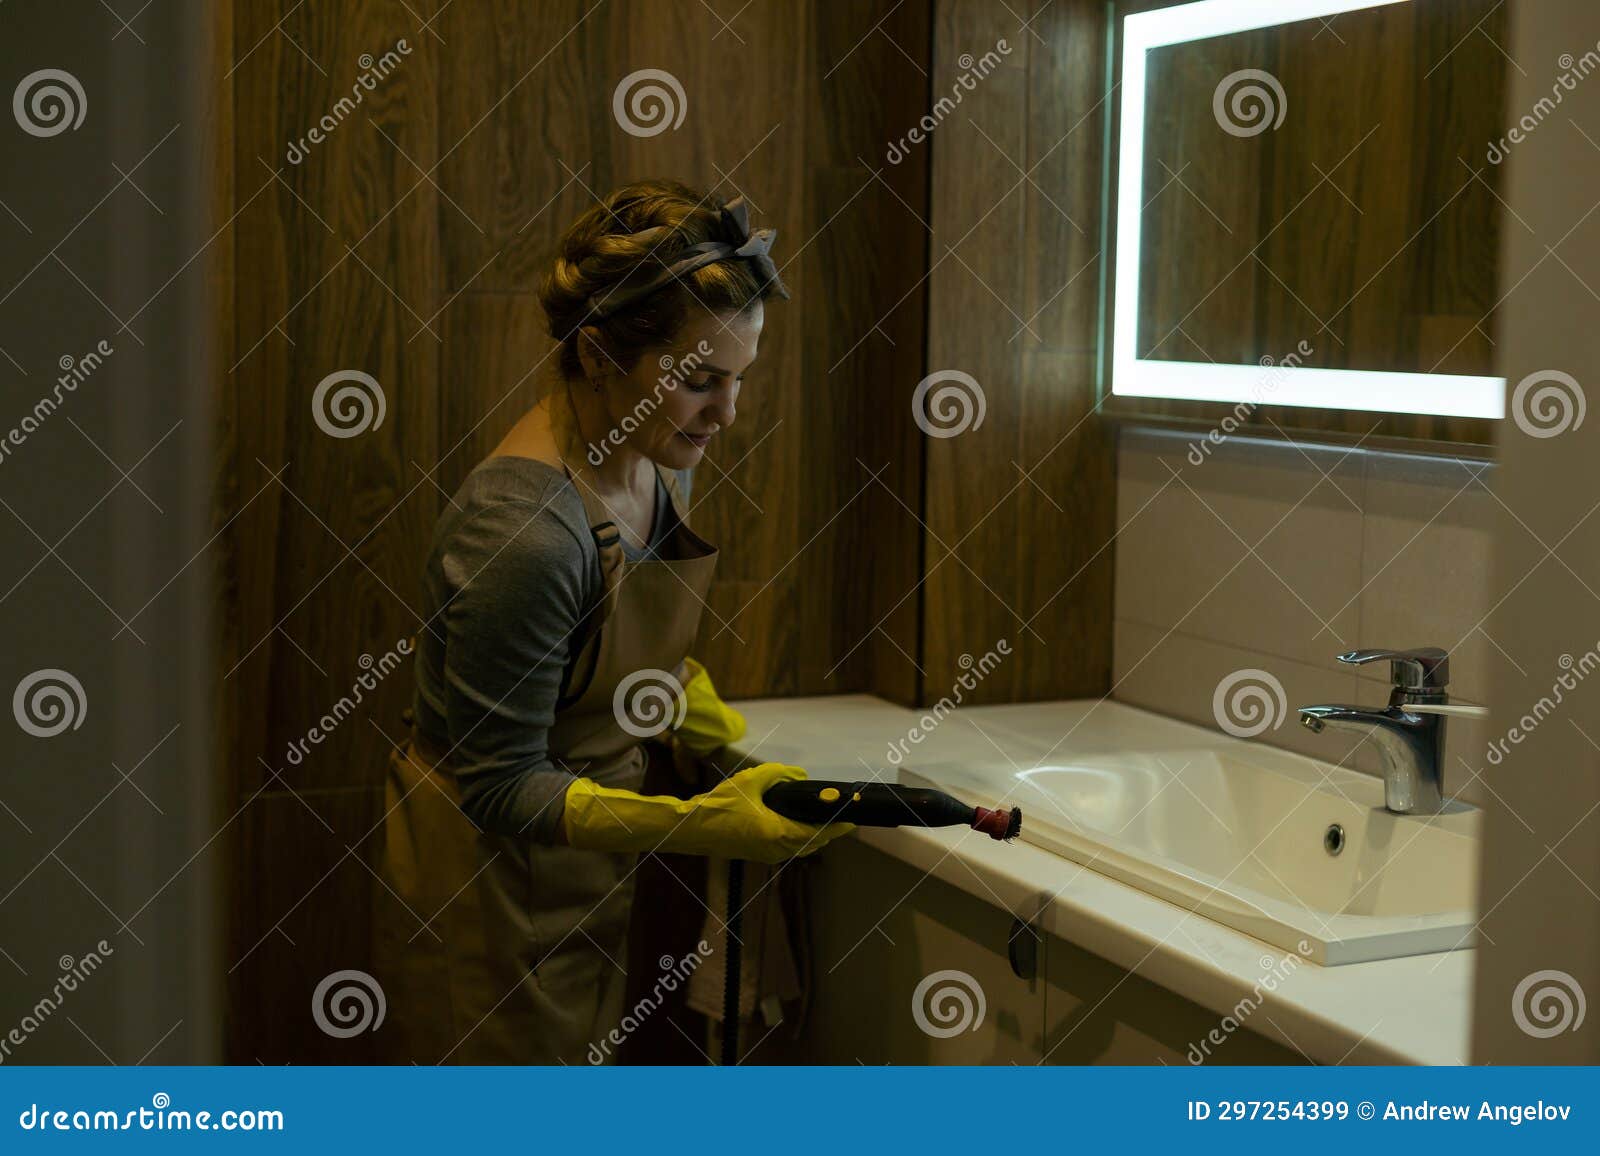 Wet Cleaning the Bathroom with a Steam Cleaner Stock Image - Image of ...